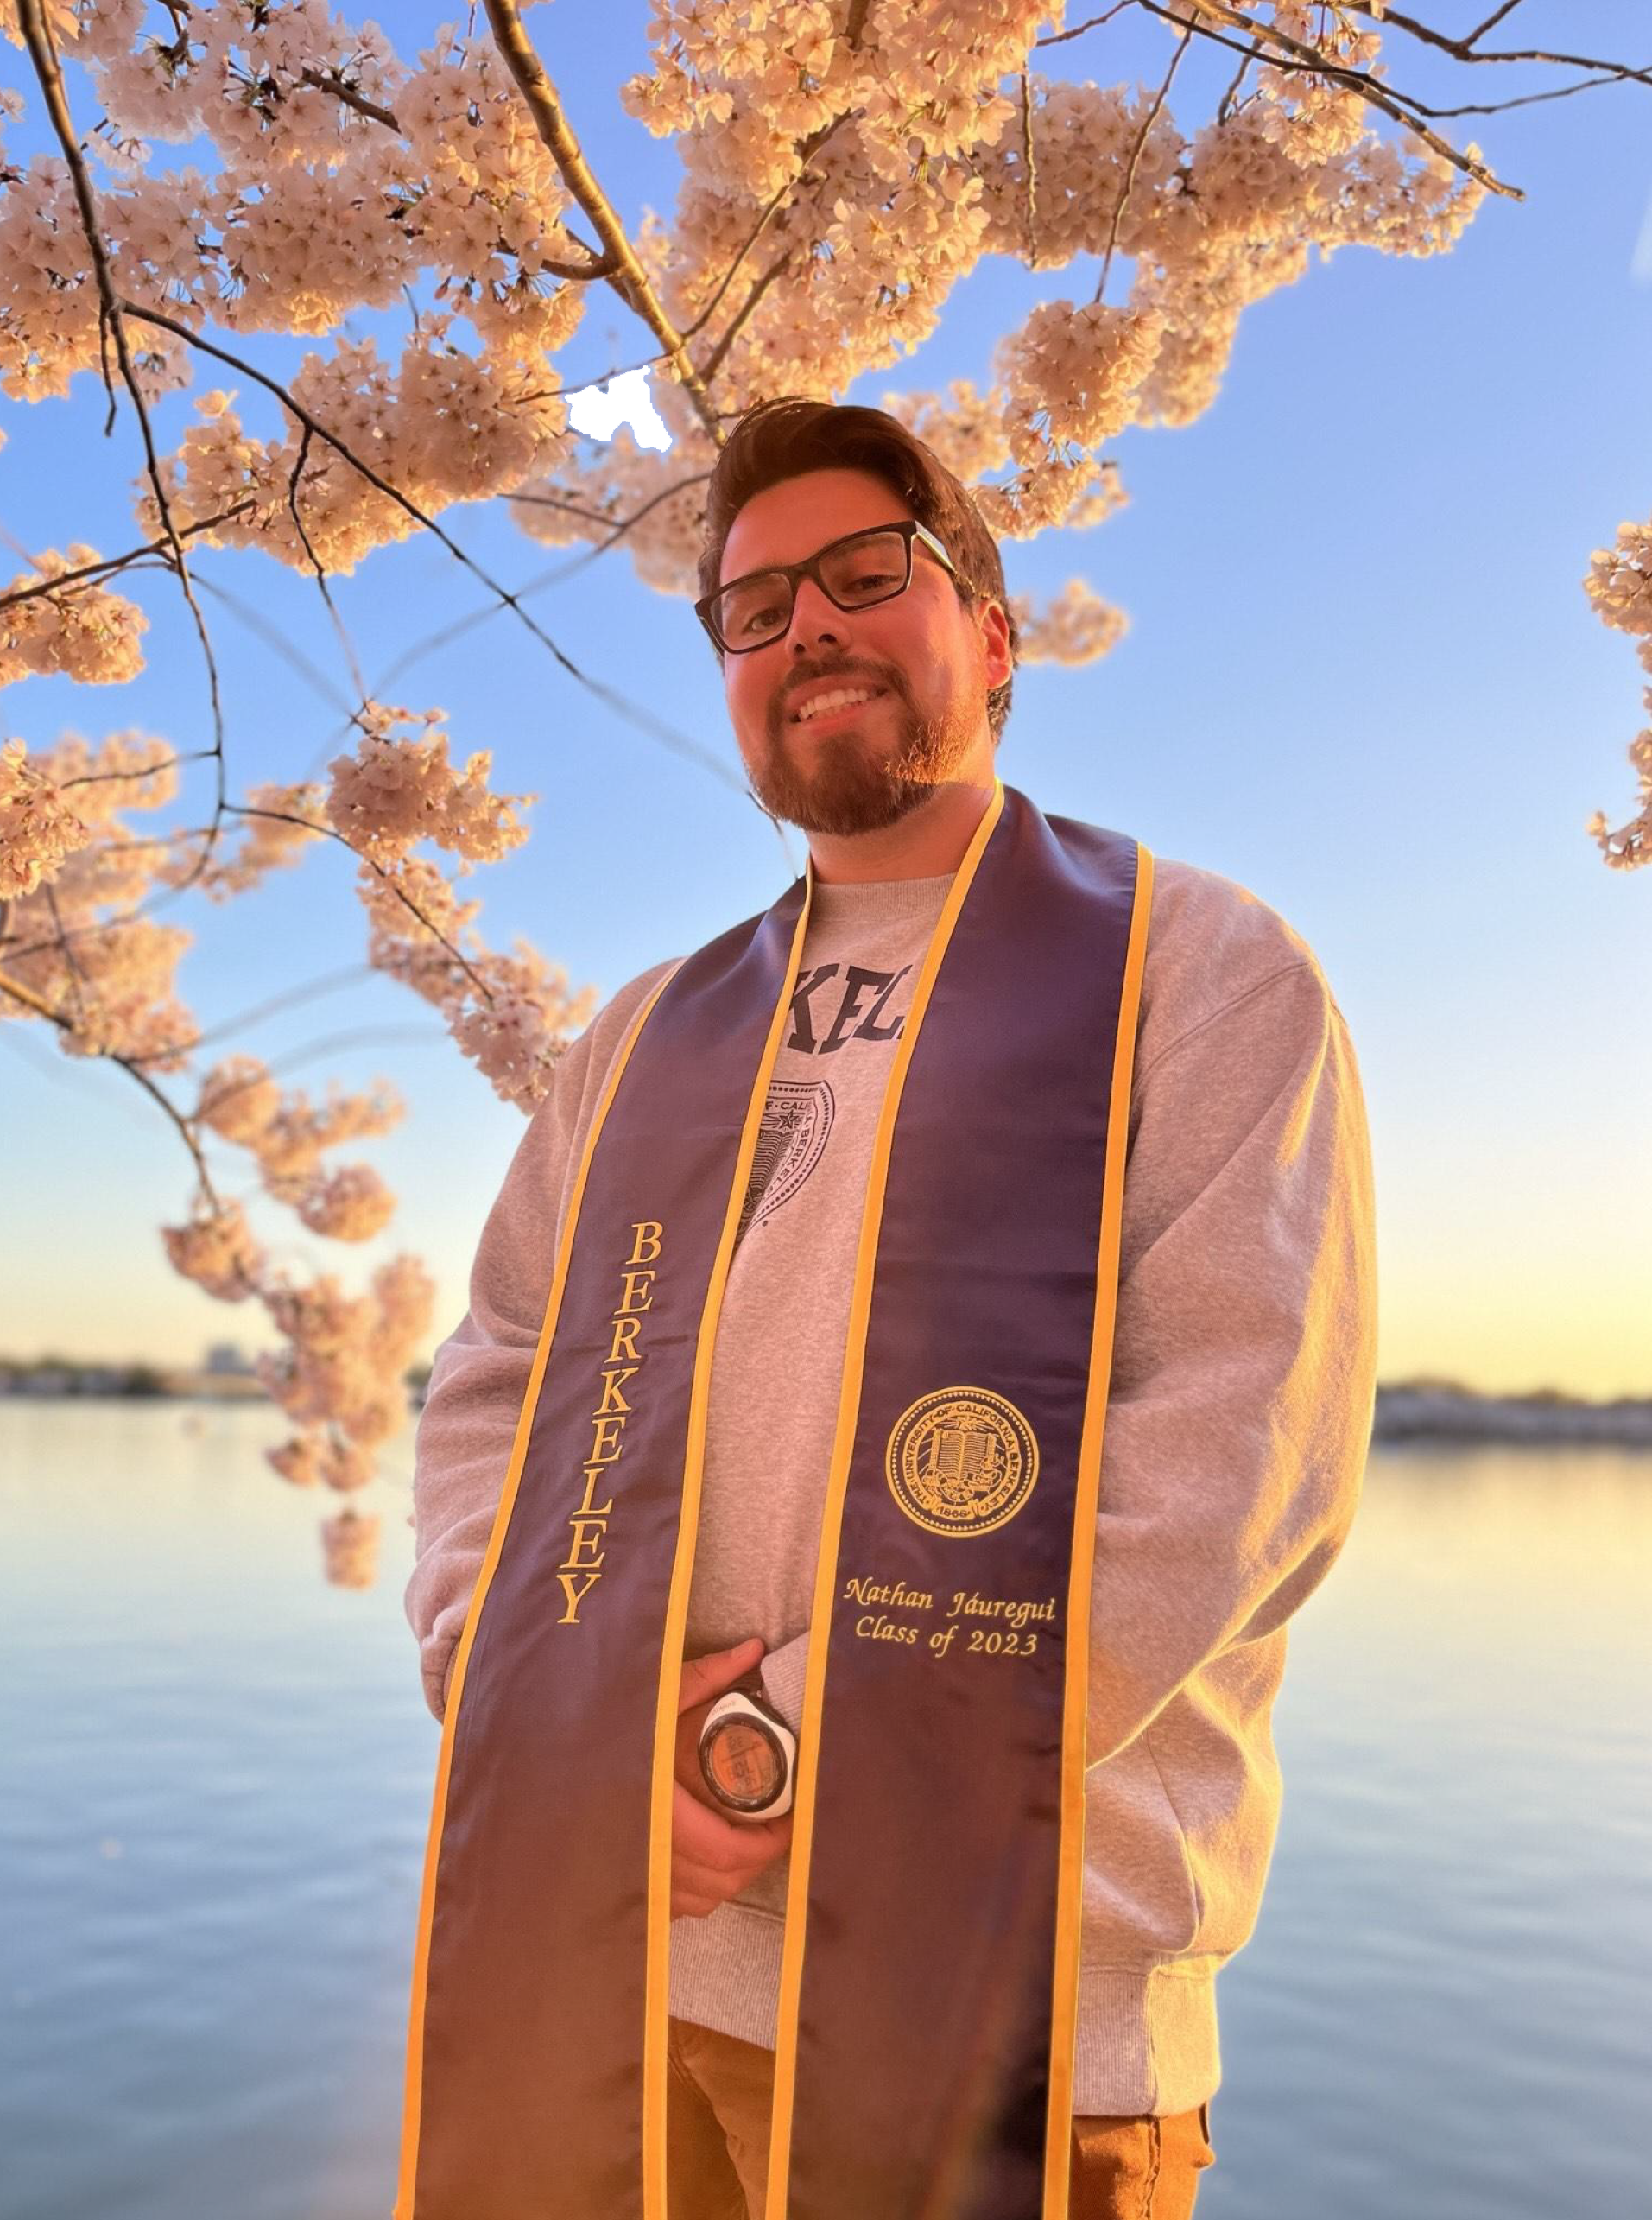 Spring 2023 UCDC Fellow Nathan Jauregui standing with his graduation stole